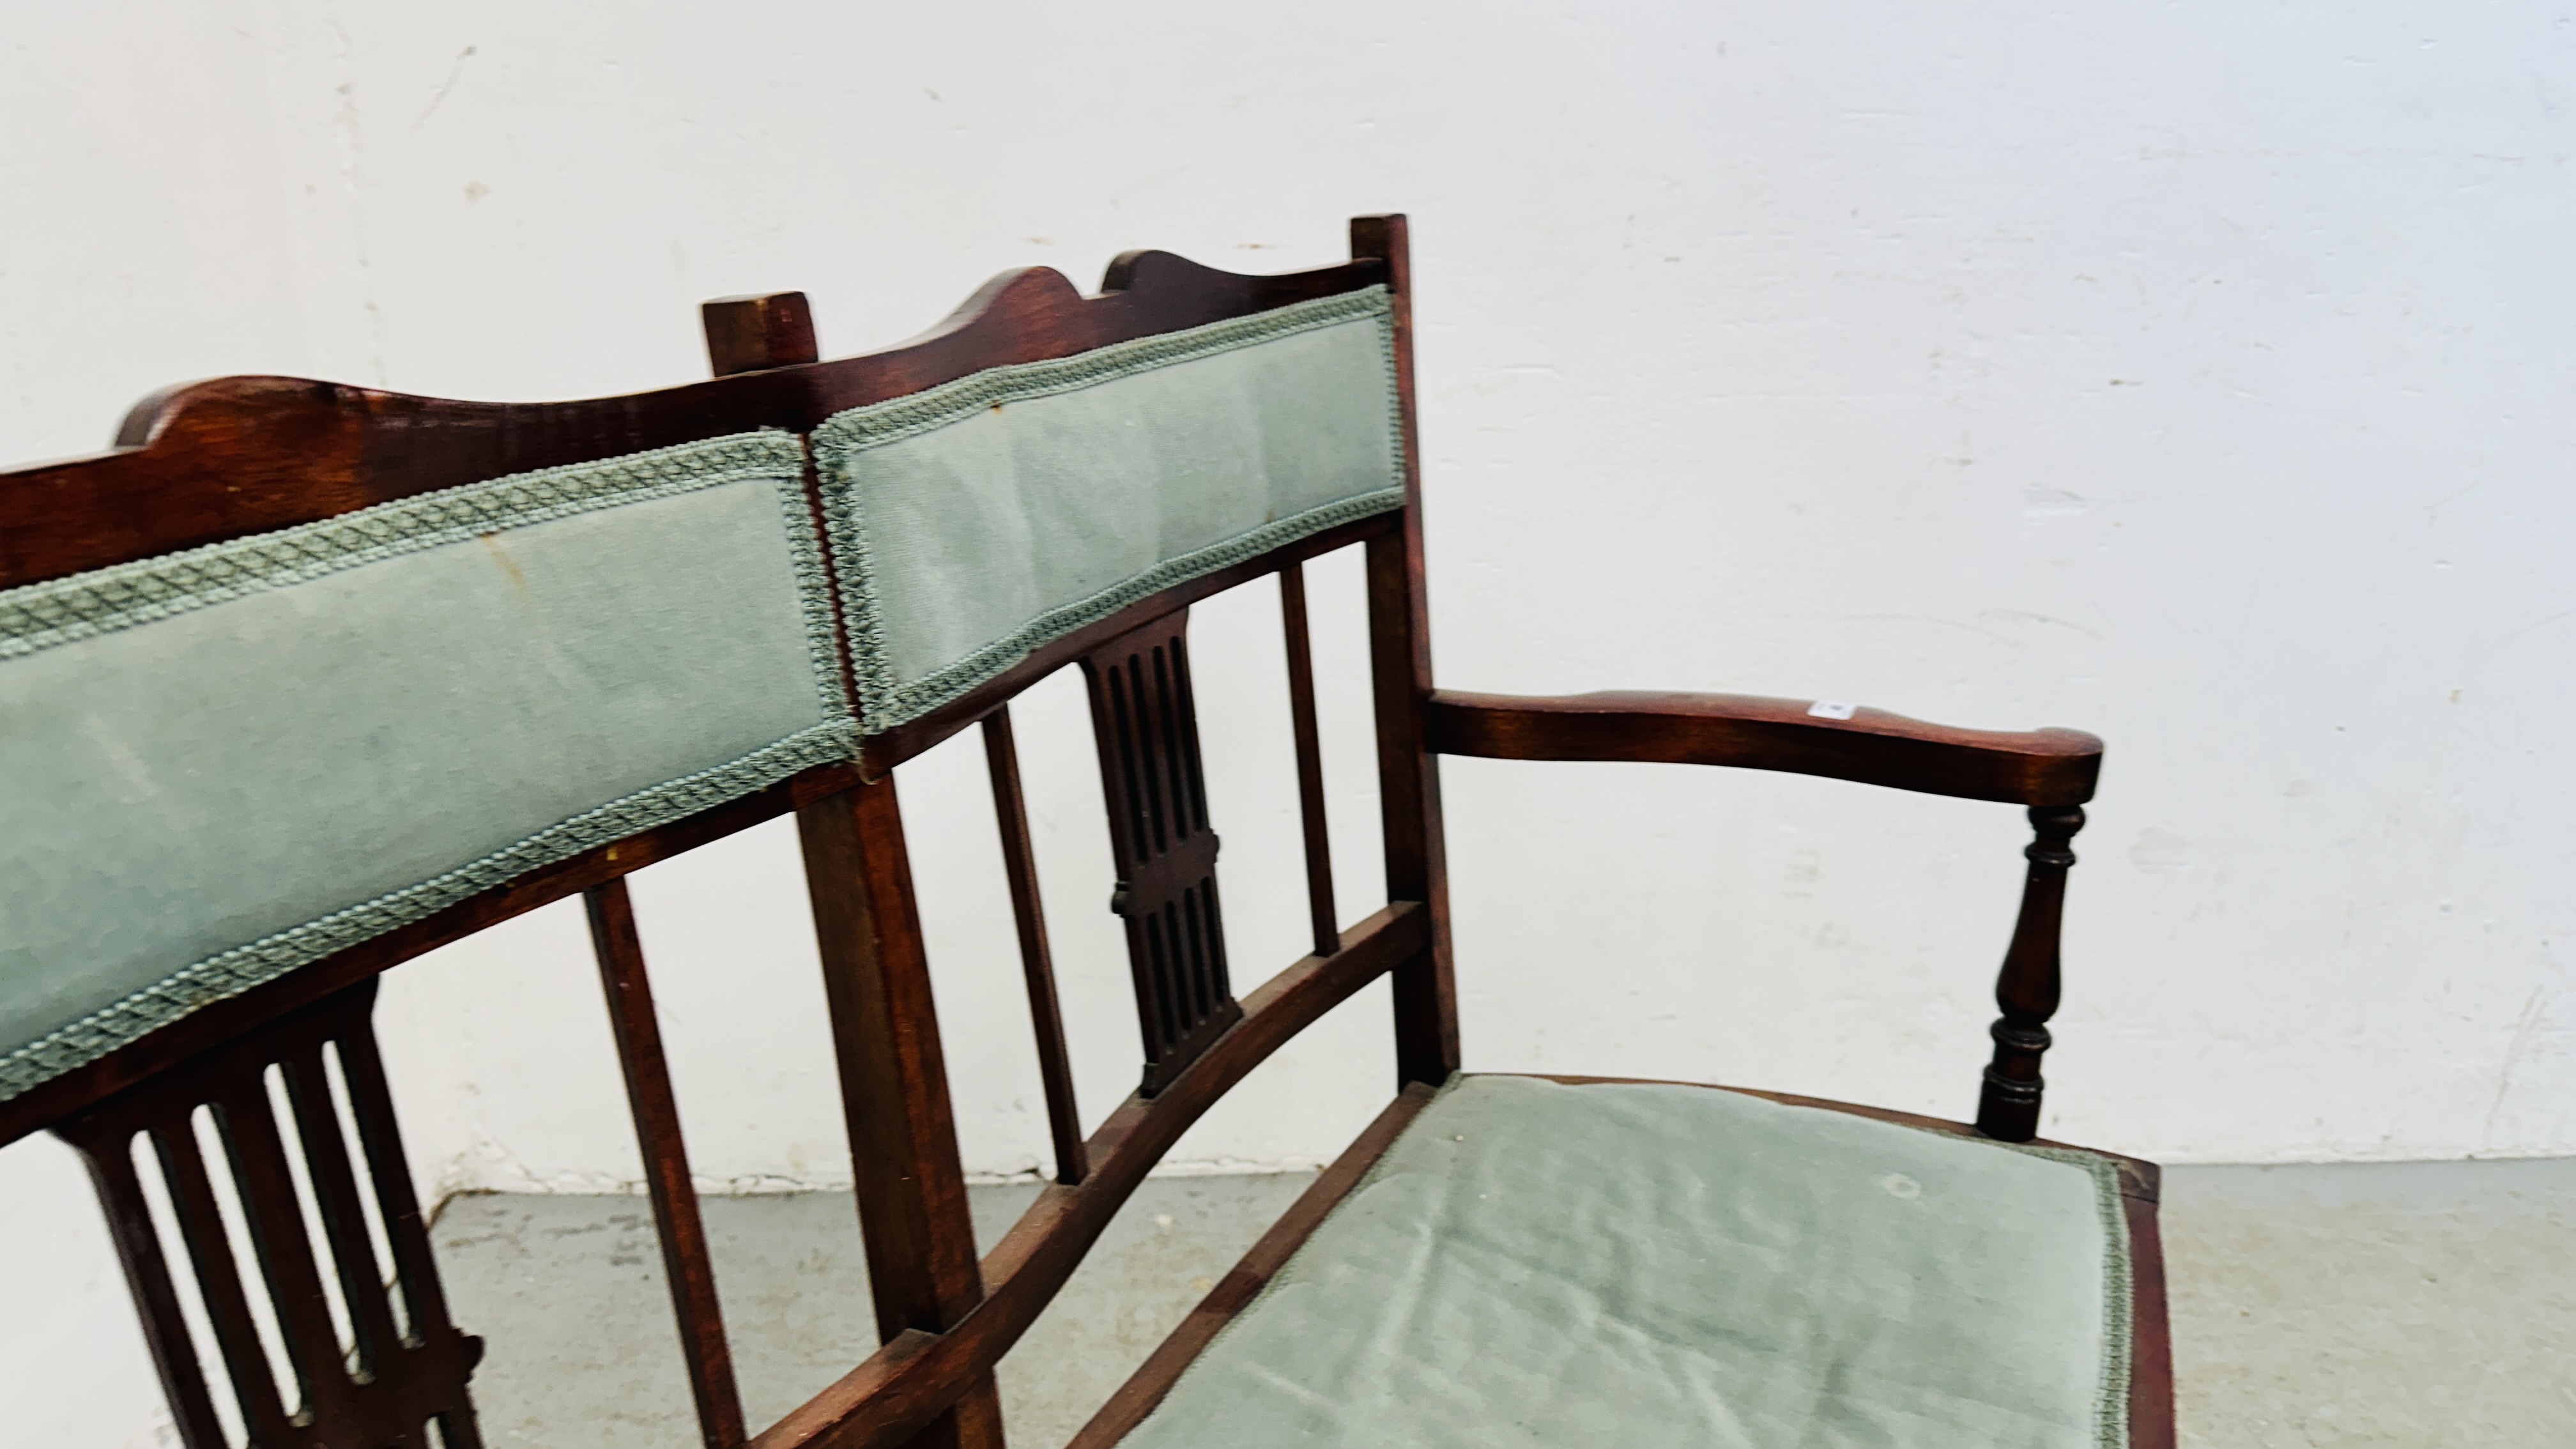 EDWARDIAN MAHOGANY 2 SEAT SOFA WITH FRETT WORK SUPPORT BACK AND GREEN UPHOLSTERY. - Image 7 of 11